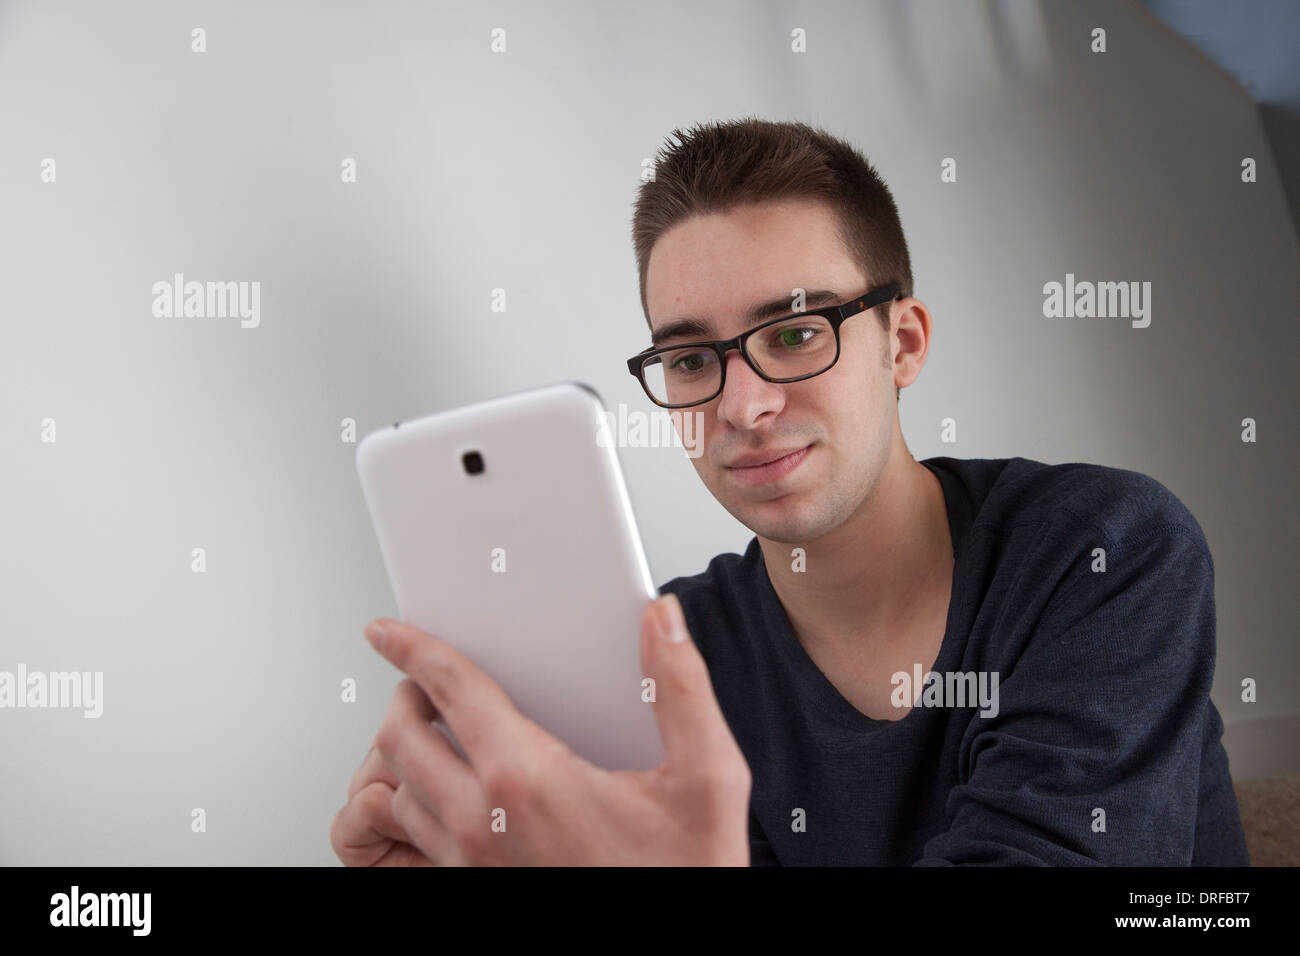 Good looking young man wearing glasses, holding a white digital tablet. Landscape shape, with copy space. Stock Photo